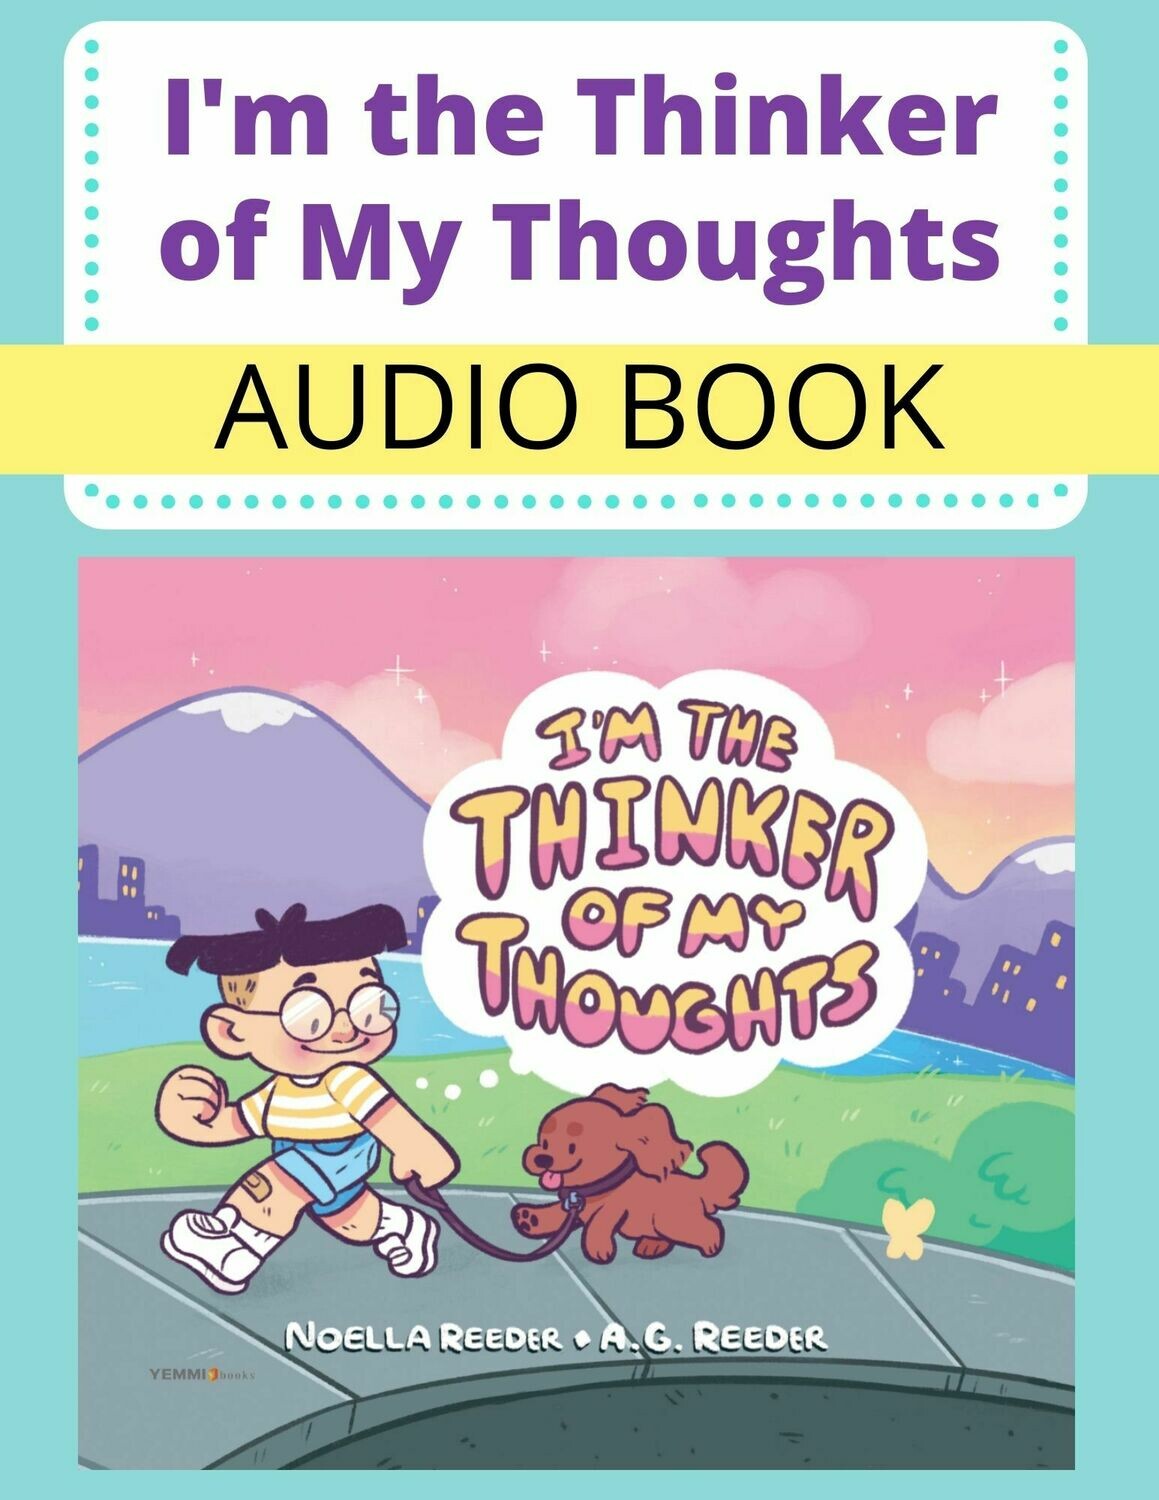 I'm the Thinker of My Thoughts AUDIOBOOK